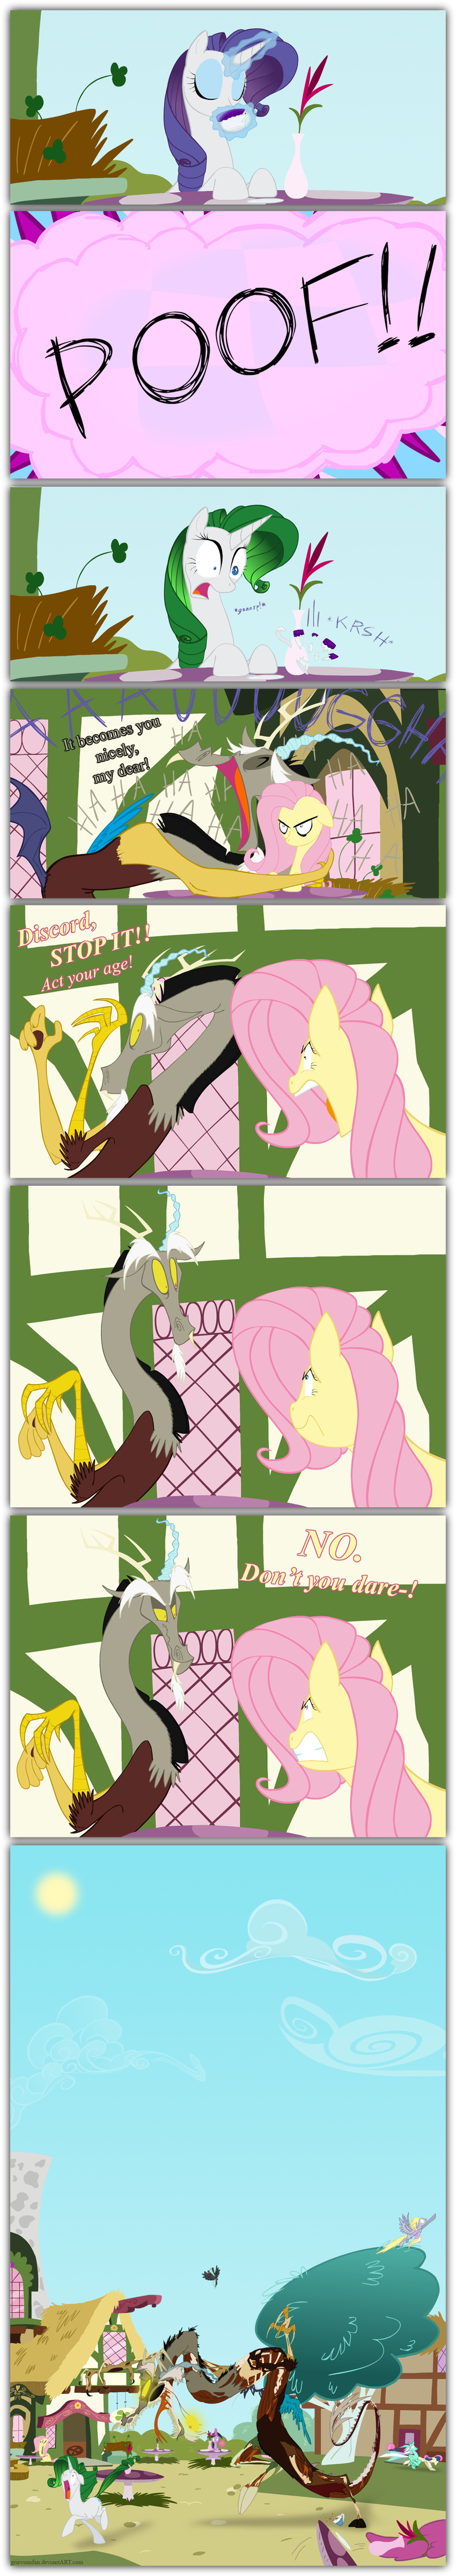 2013 amber_eyes angry blonde_hair bonbon_(mlp) broken building chair cloud clouds clover clovers comic couple creepy crying cup cutie_mark daytime derpy_hooves_(mlp) dialog dinky_hooves_(mlp) discord_(mlp) draconequus english_text equine eyes_closed facepalm female feral flower fluttershy_(mlp) friendship_is_magic fur glass grass grey_fur grievousfan group hair hooves horn horse humor laugh laughter looking_at_viewer looking_at_viewers lyra_(mlp) lyra_heartstrings_(mlp) magic male mammal multi-colored_hair my_little_pony open_mouth outside pegasus pissed pissed_off pony purple_eyes purple_hair raised_tail rarity_(mlp) red_eyes scary screaming shops siding sitting sky smashed smile smoke solo stone sun table tables tea tea_cup teacup teeth text the_truth thunderlane_(mlp) tongue tree trim twilight_sparkle_(mlp) two_tone_hair undead unicorn vase wall white_fur window windows wings wood yelling yellow_eyes zombie